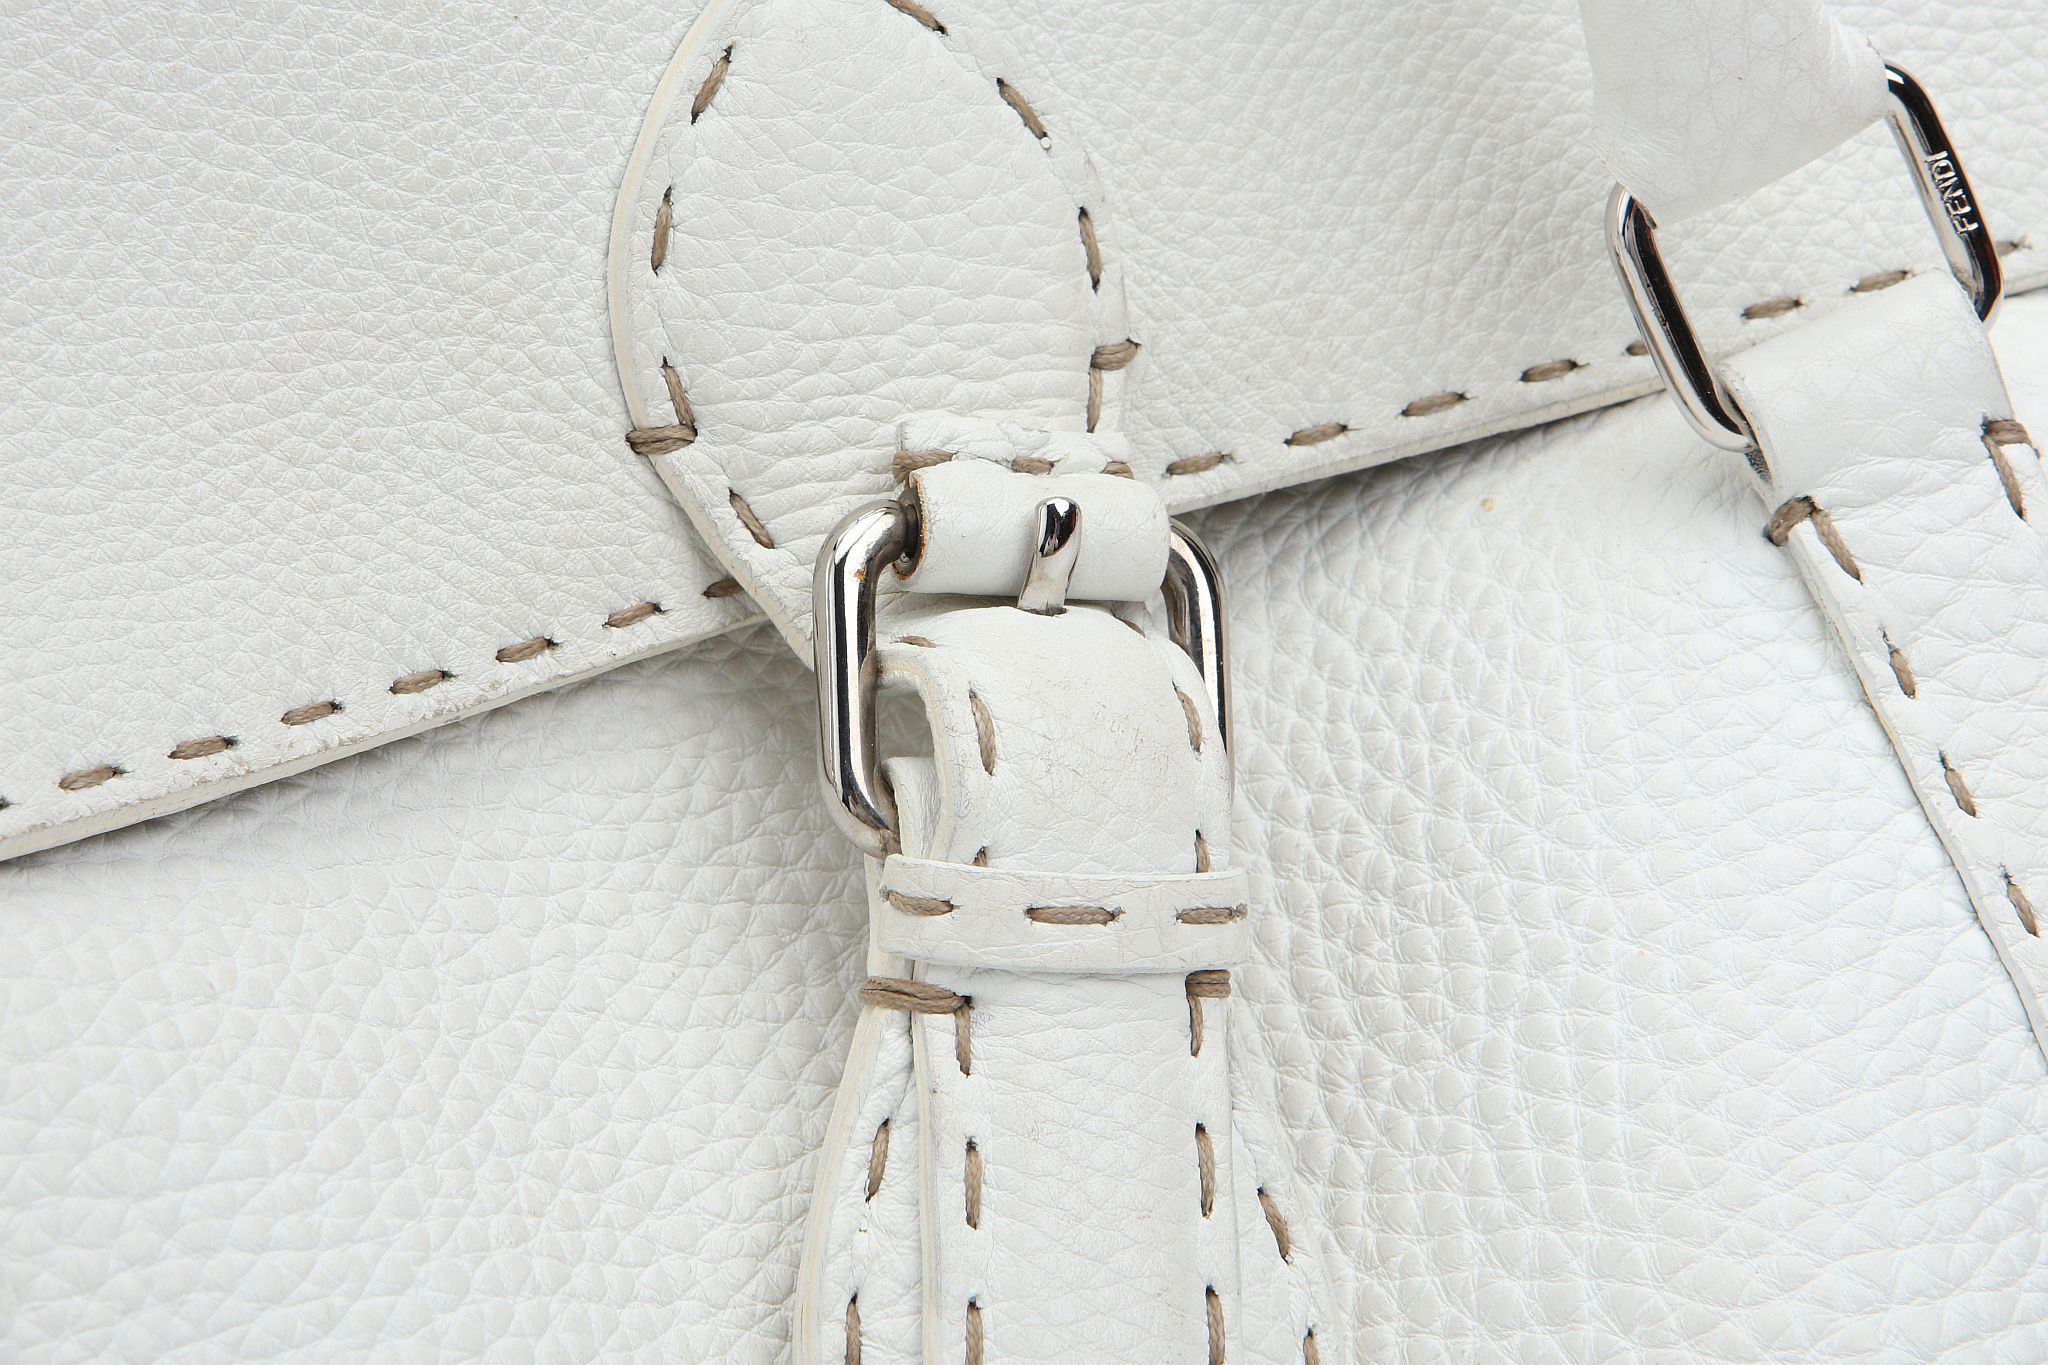 FENDI SELLERIA SHOULDER BAG, white stitched leather with silver tone hardware, 35cm wide, 30cm high, - Image 4 of 12